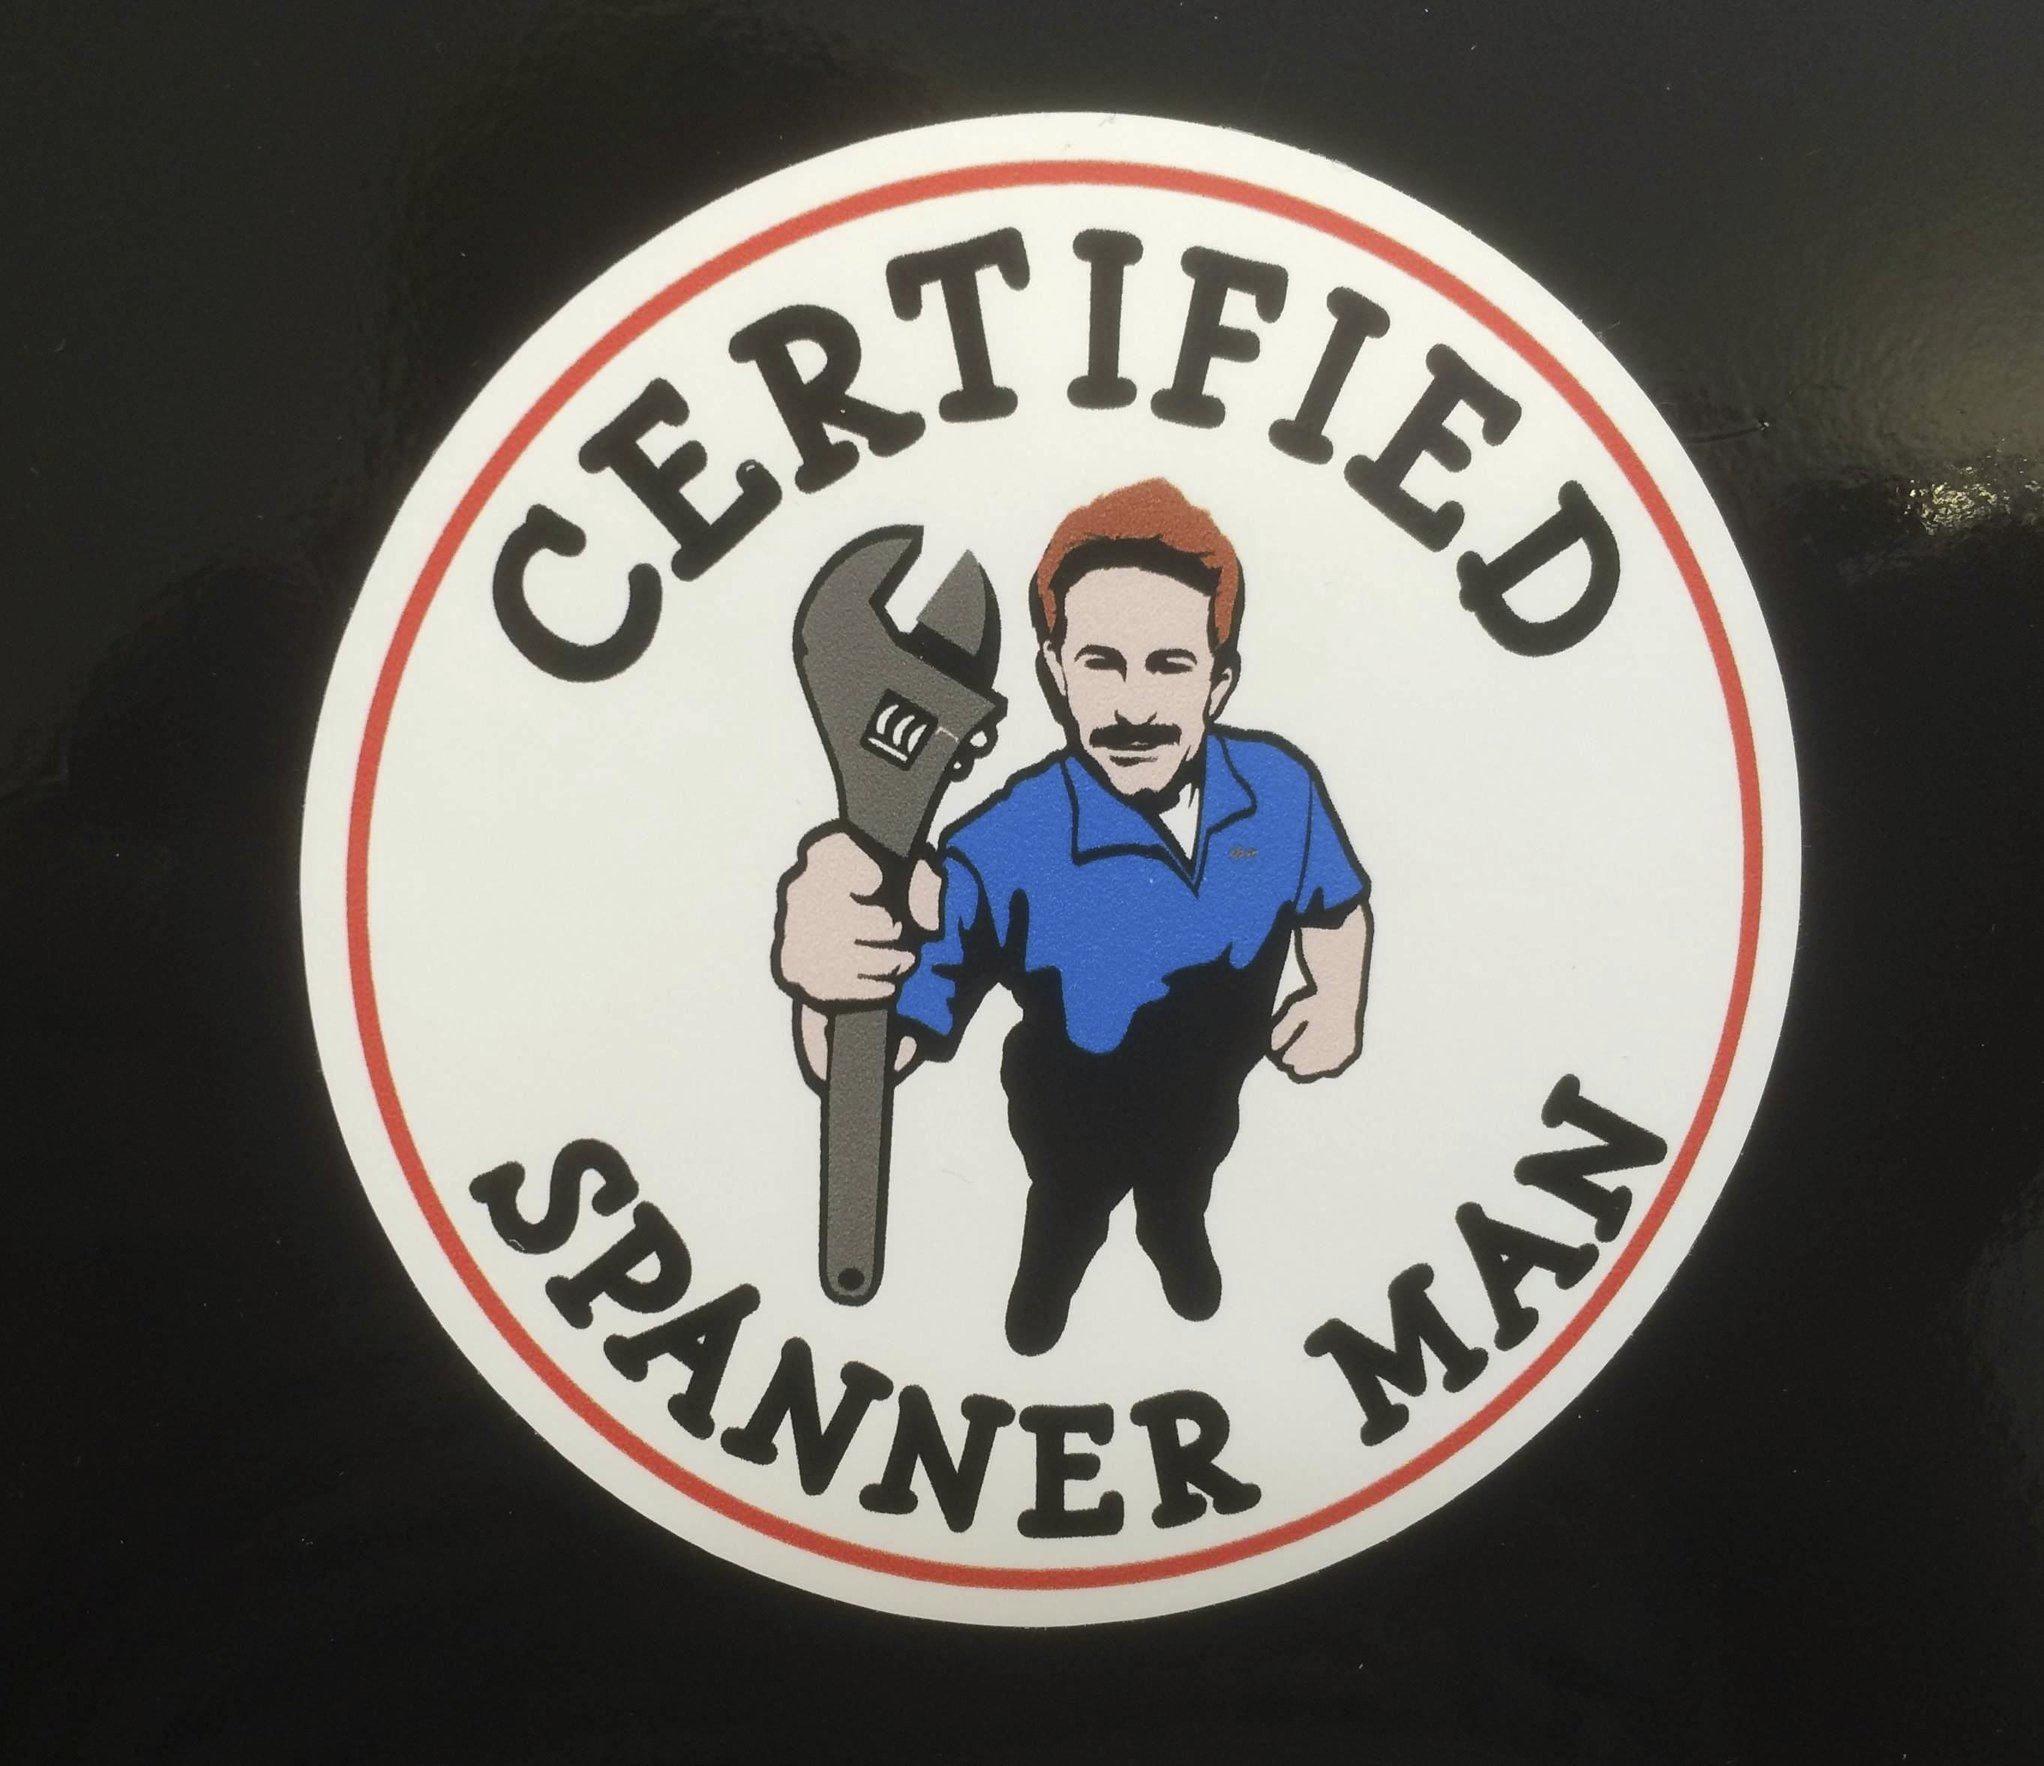 CERTIFIED SPANNER MAN STICKER. Certified Spanner Man in black lettering surrounds a man dressed in blue overalls holding a spanner. A white circular sticker with a red border.